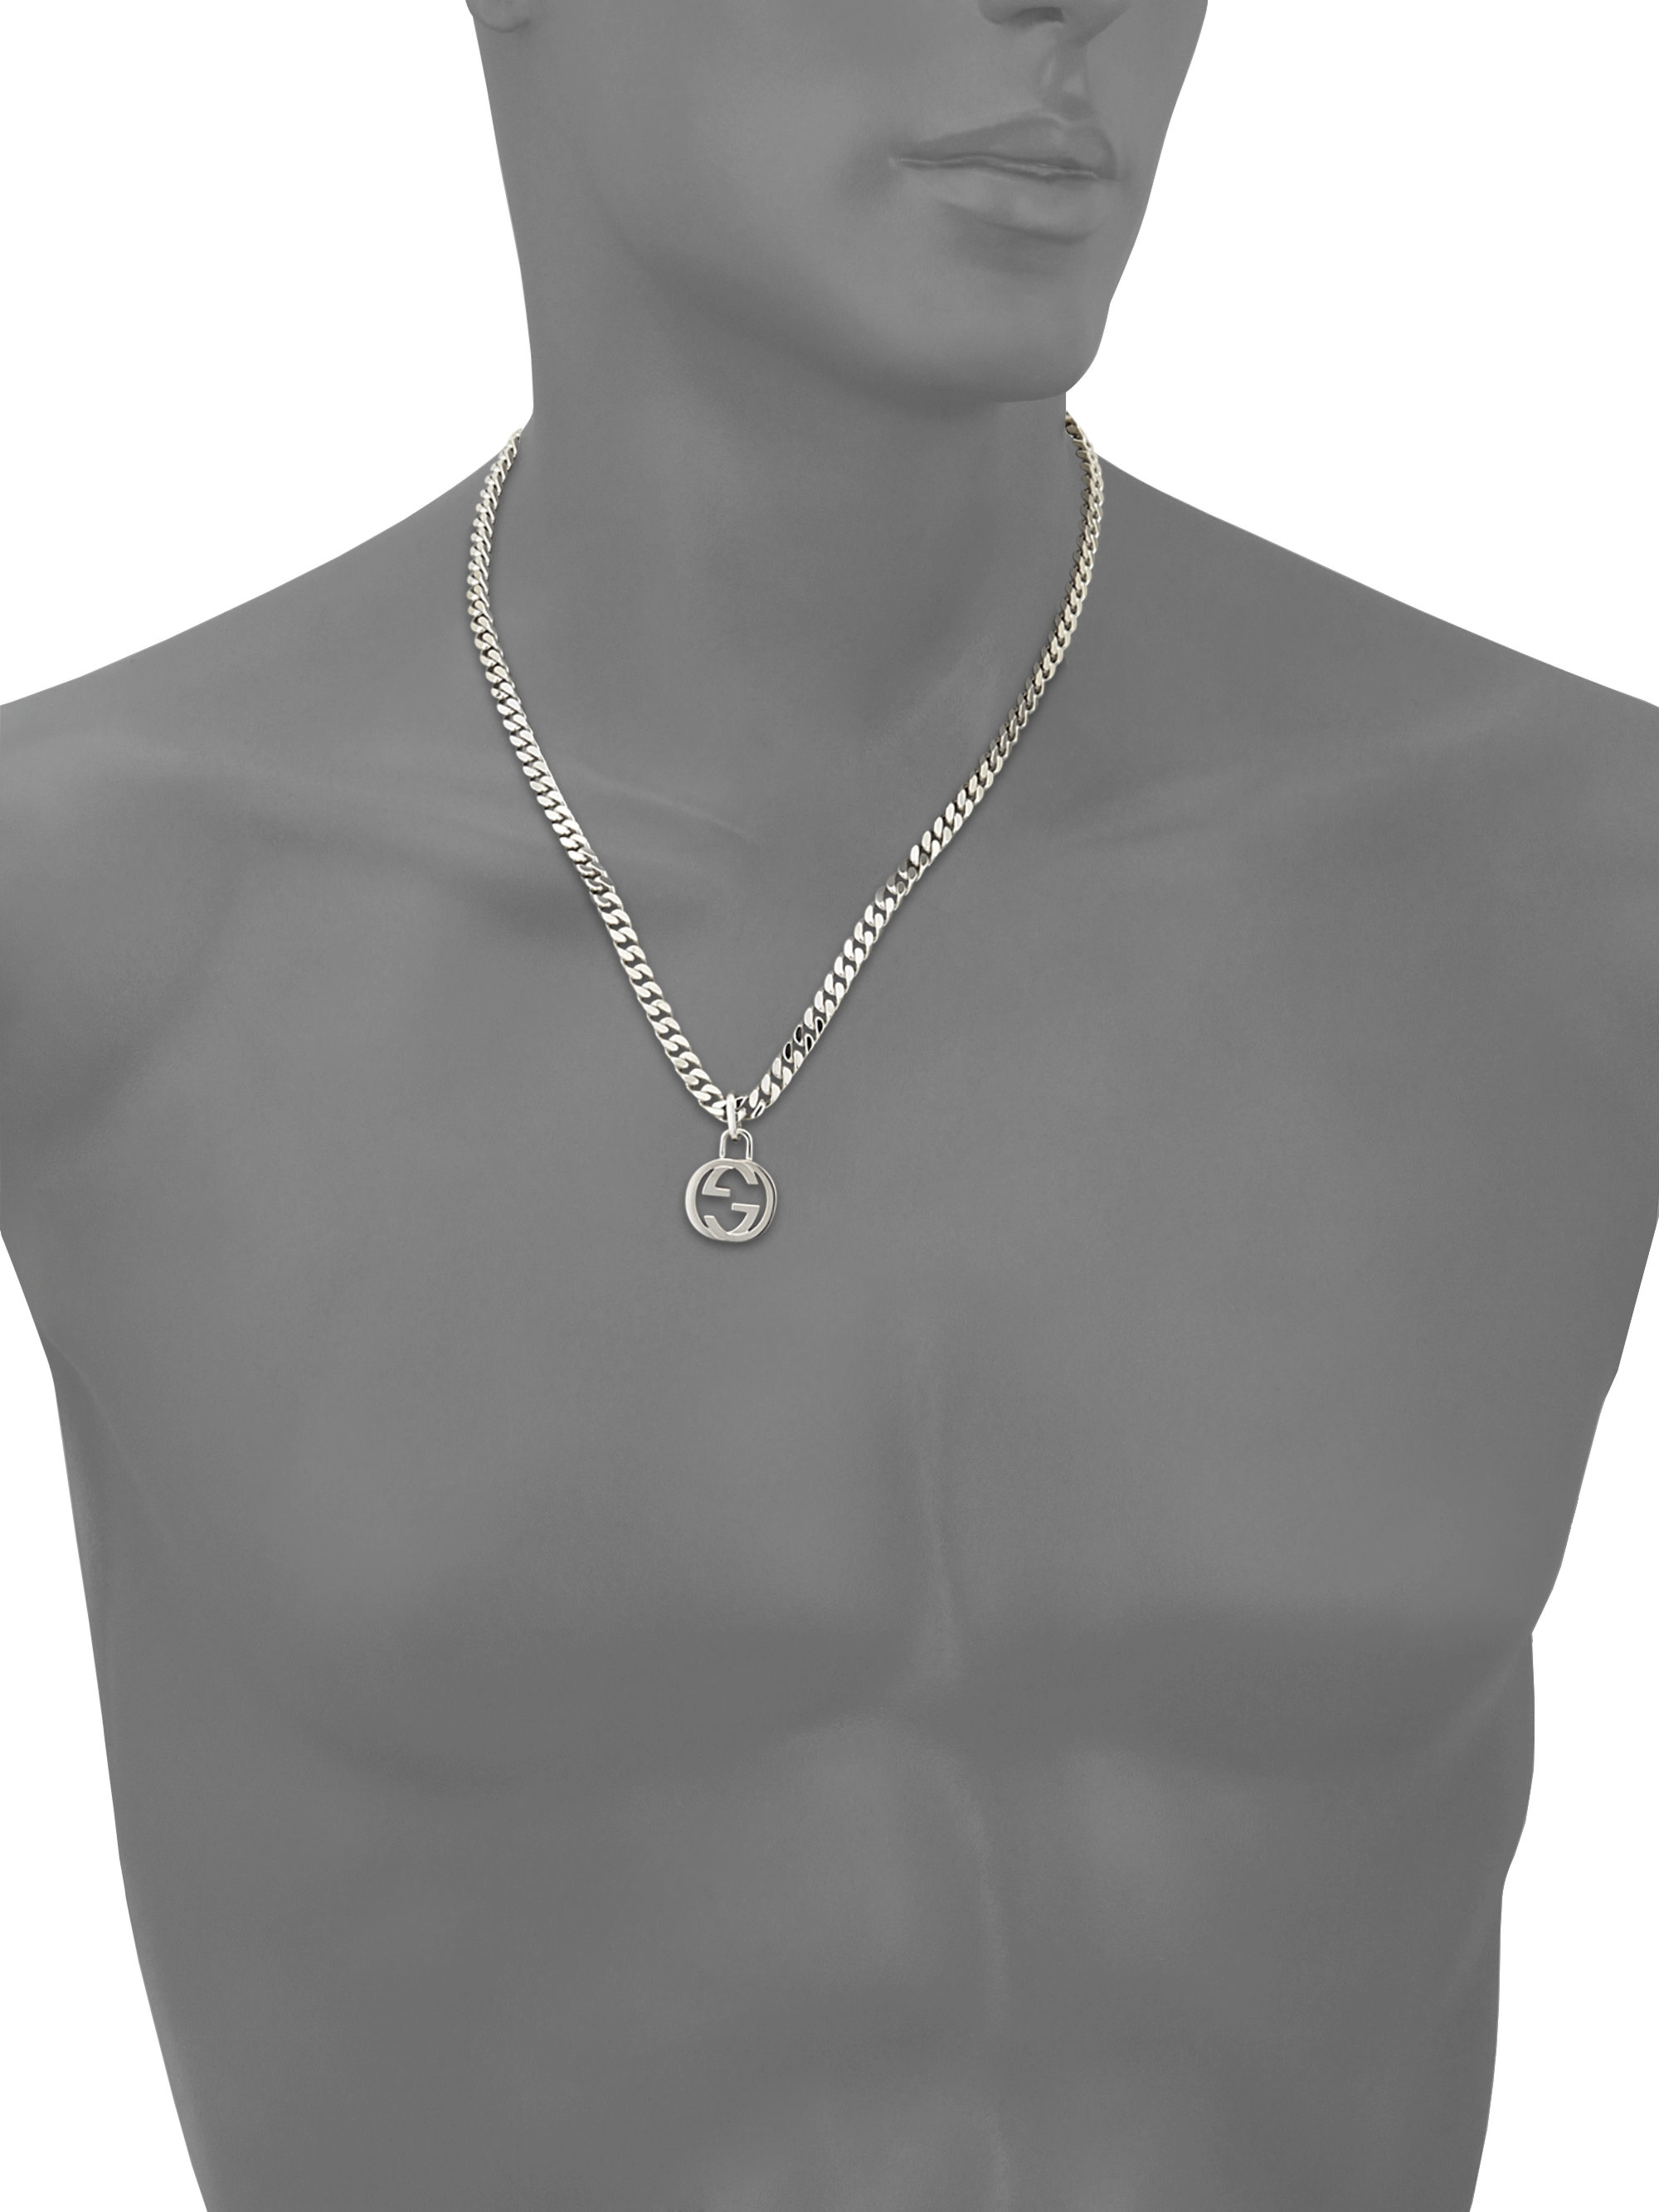 Gucci Interlocking Gg Sterling Silver Necklace in Metallic for Men - Lyst